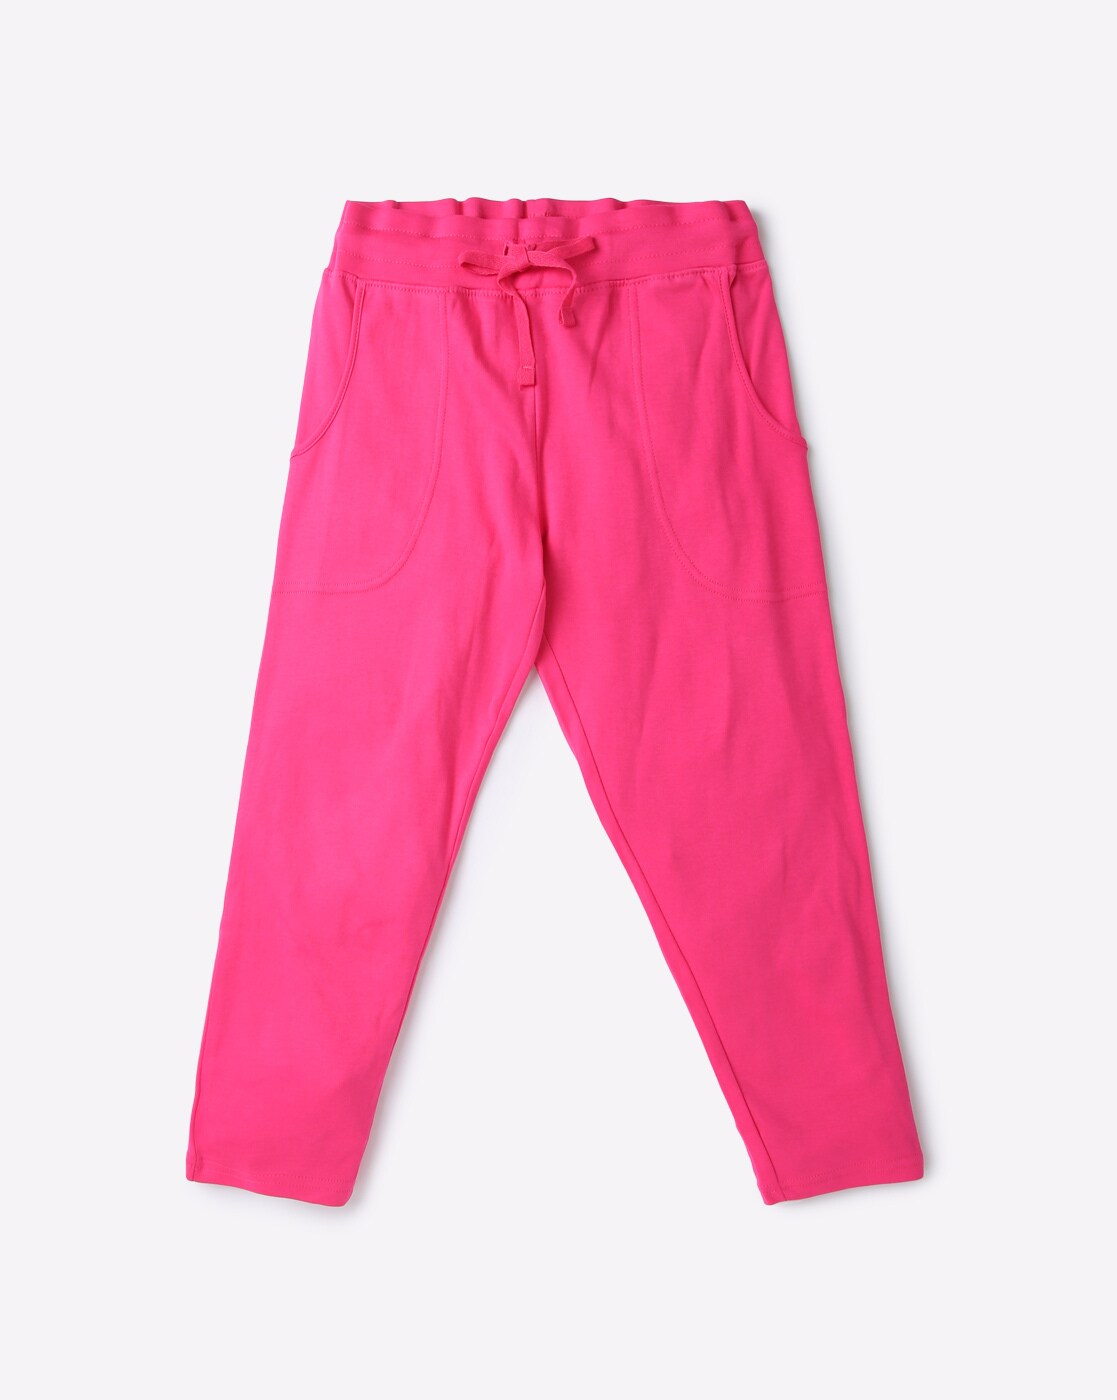 Buy Girls Red Solid Regular Fit Trousers Online  565627  Allen Solly